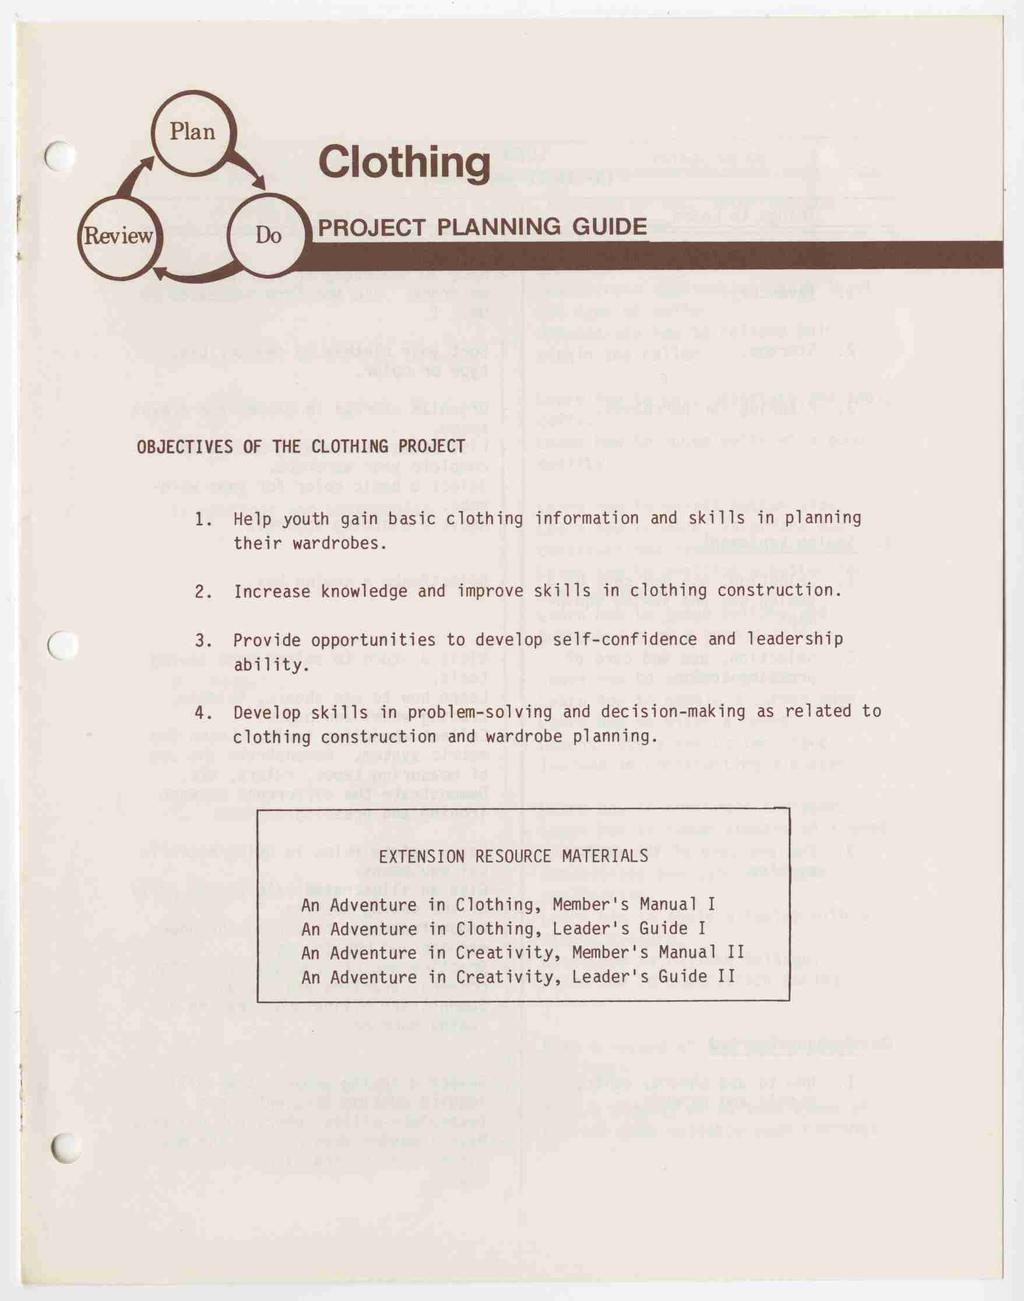 OBJECTIVES OF THE CLOTHING PROJECT 1. Help youth gain basic clothing information and skills in planning their wardrobes. 2. Increase knowledge and improve skills in clothing construction. 3.